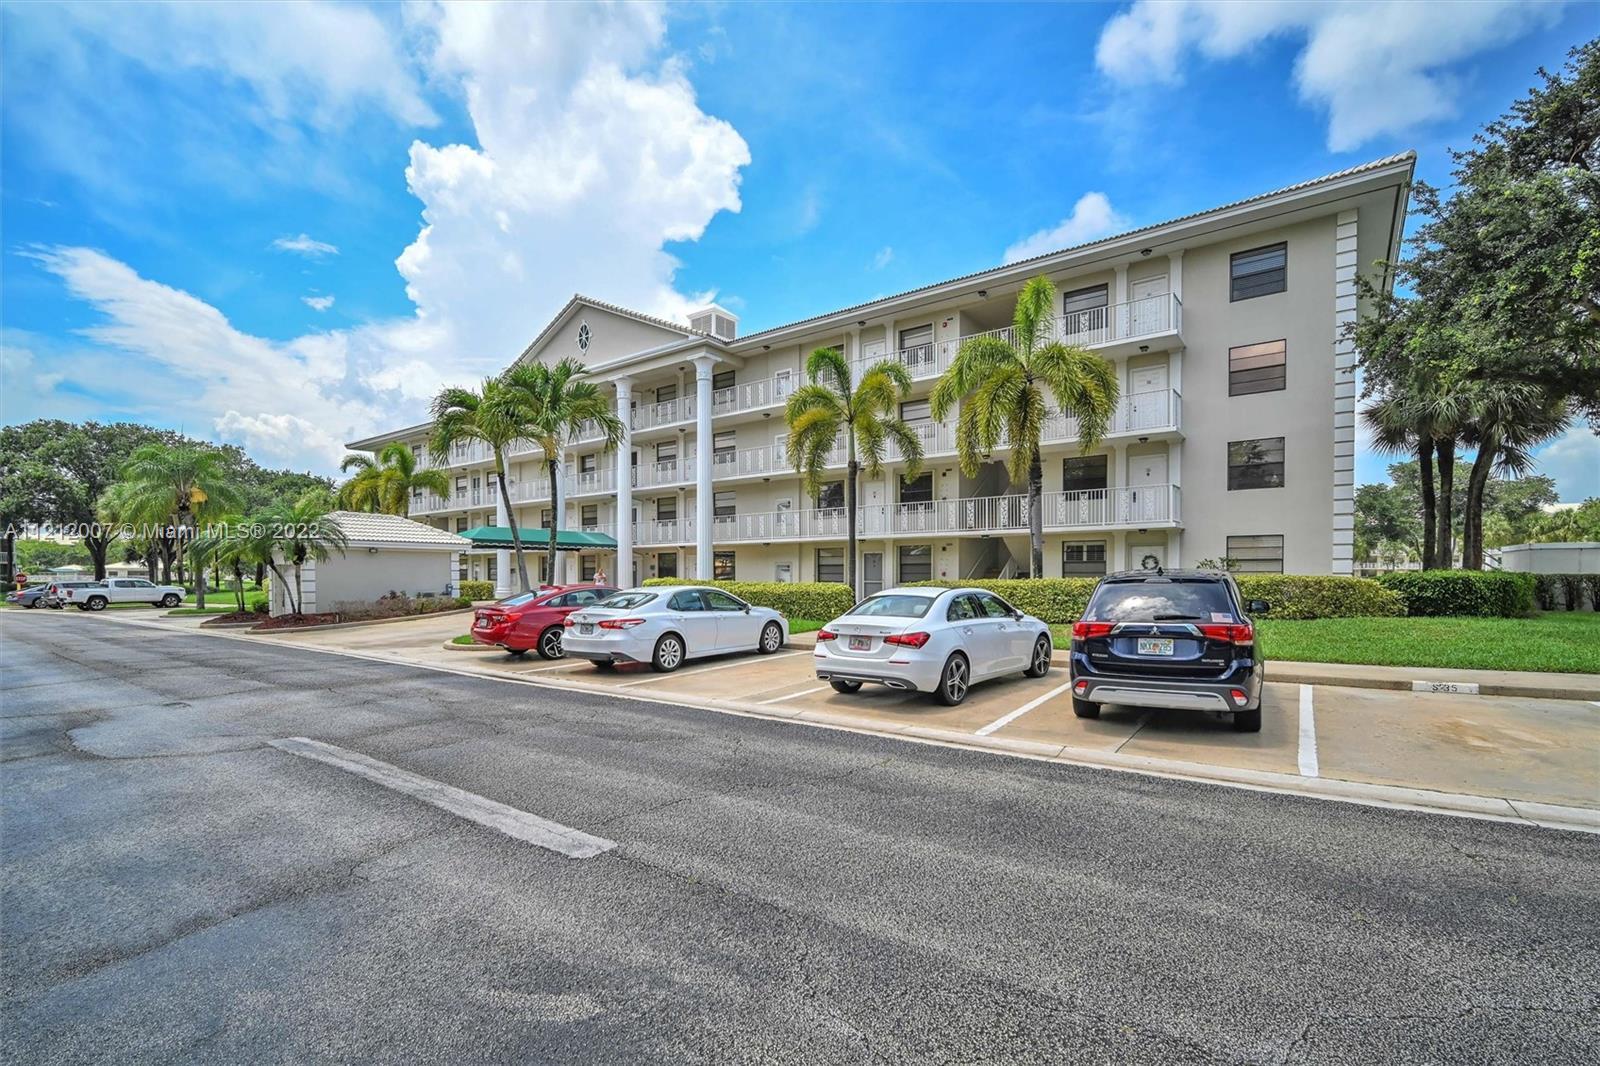 RARELY AVAILABLE SPACIOUS TURN-KEY 2 BED/2 BATH BOCA SECOND FLOOR CONDO WITH LAKEFRONT VIEW. ALL AGE